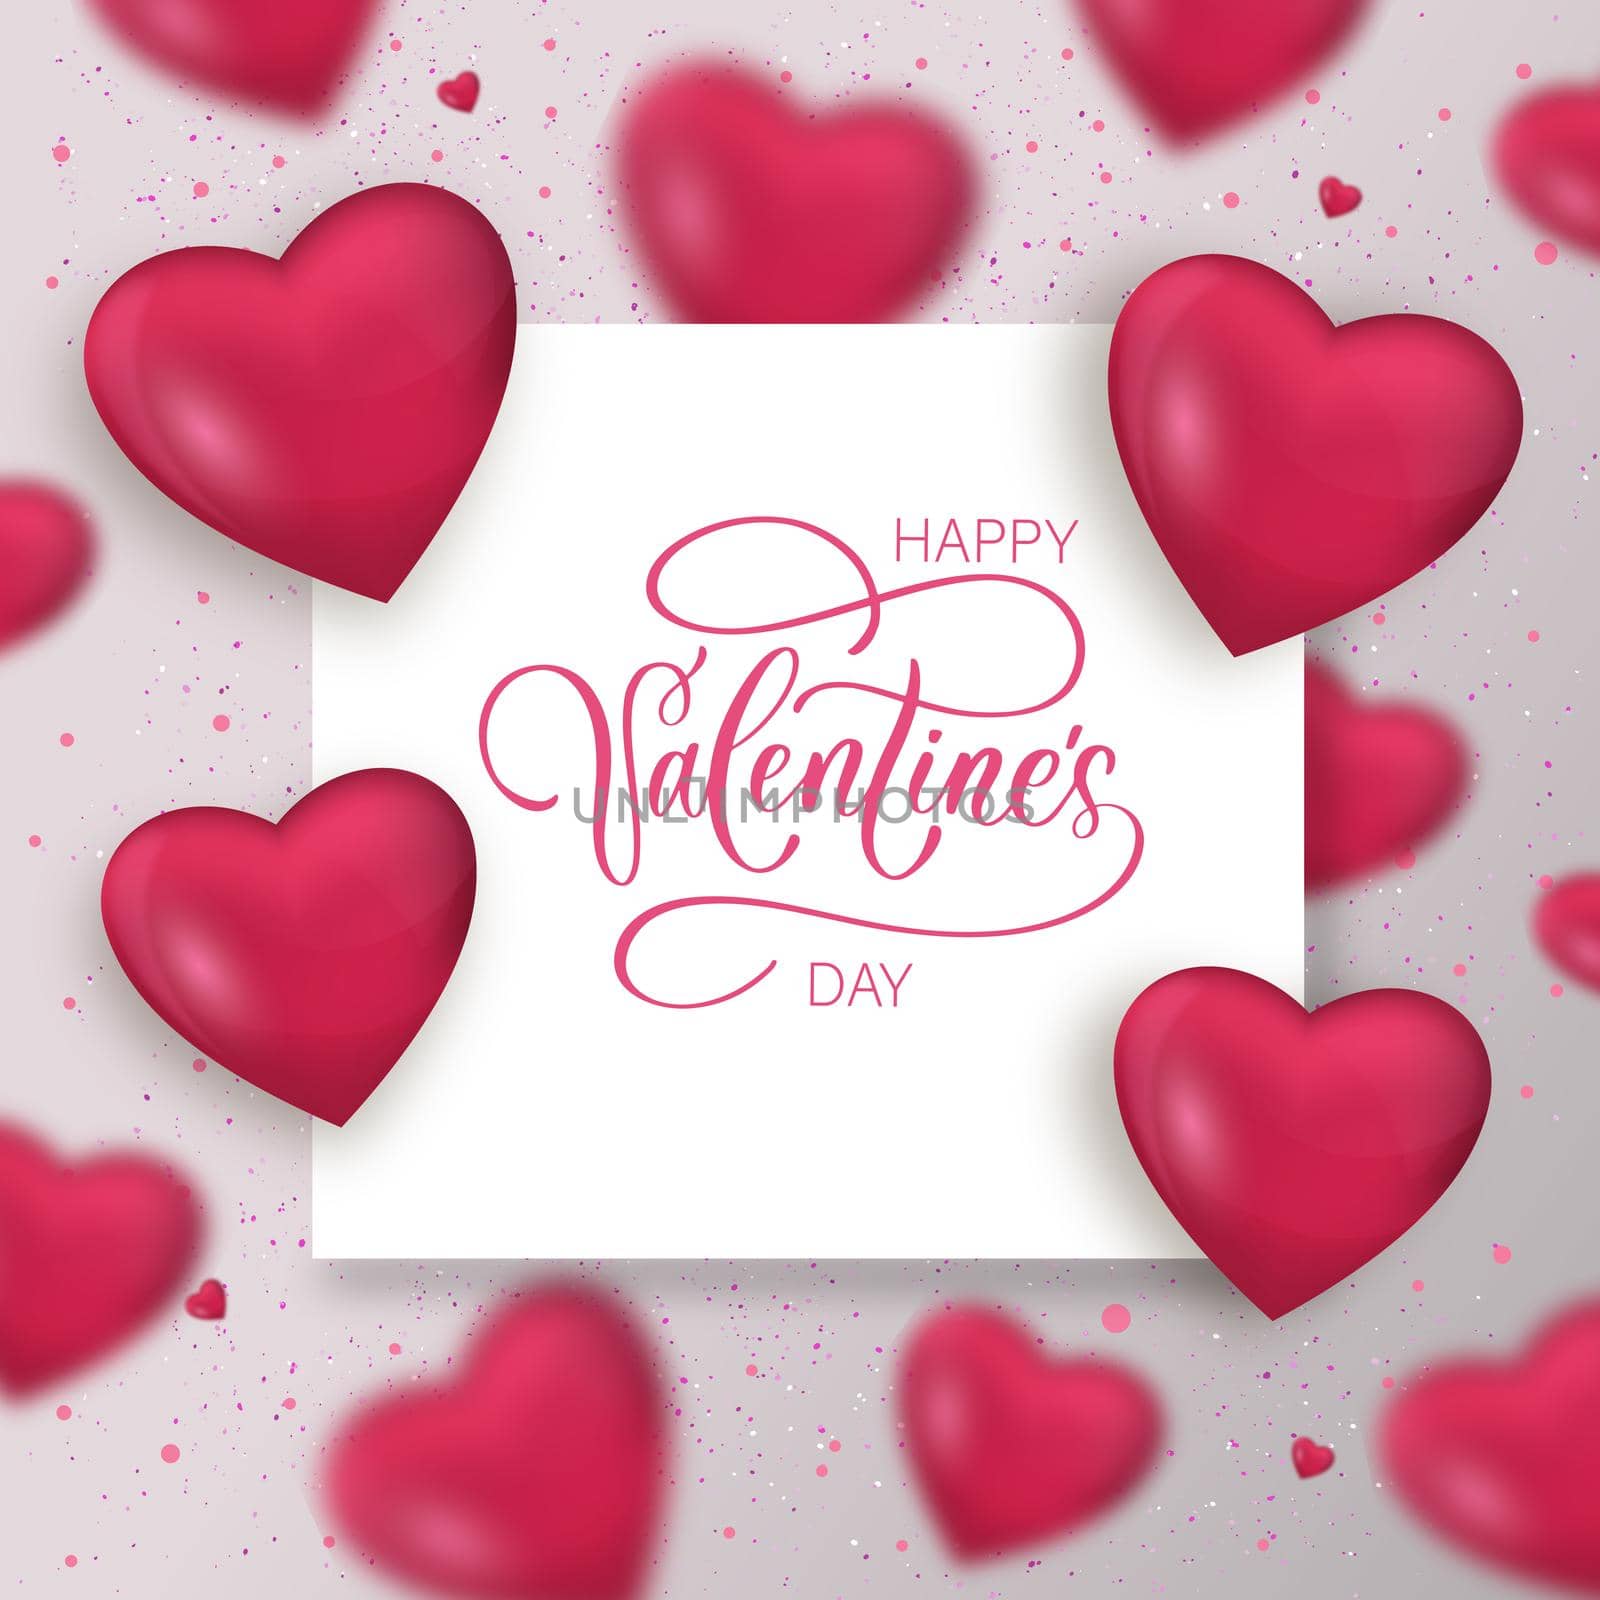 Valentine's day sale background with realistic 3d hearts. For wallpaper, flyers, invitation, posters, brochure, banners